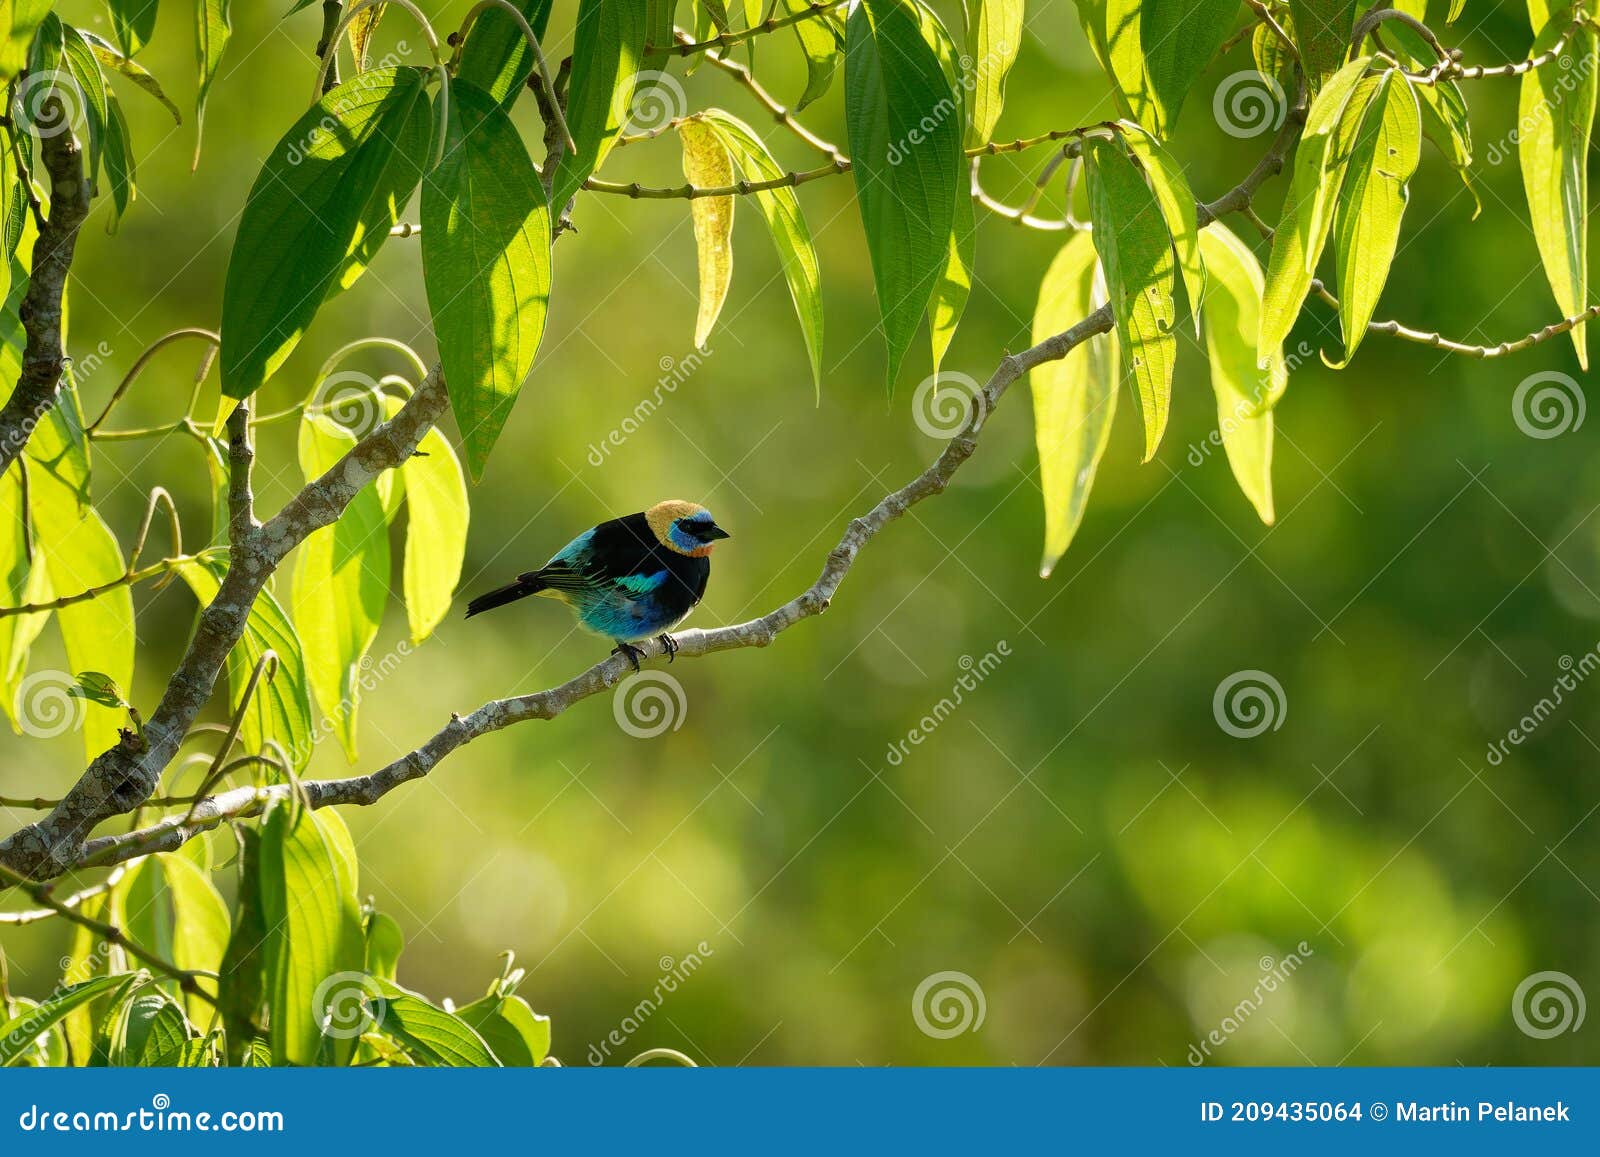 golden-hooded tanager - tangara larvata medium-sized passerine bird, resident breeder from mexico south to ecuador, black and blue